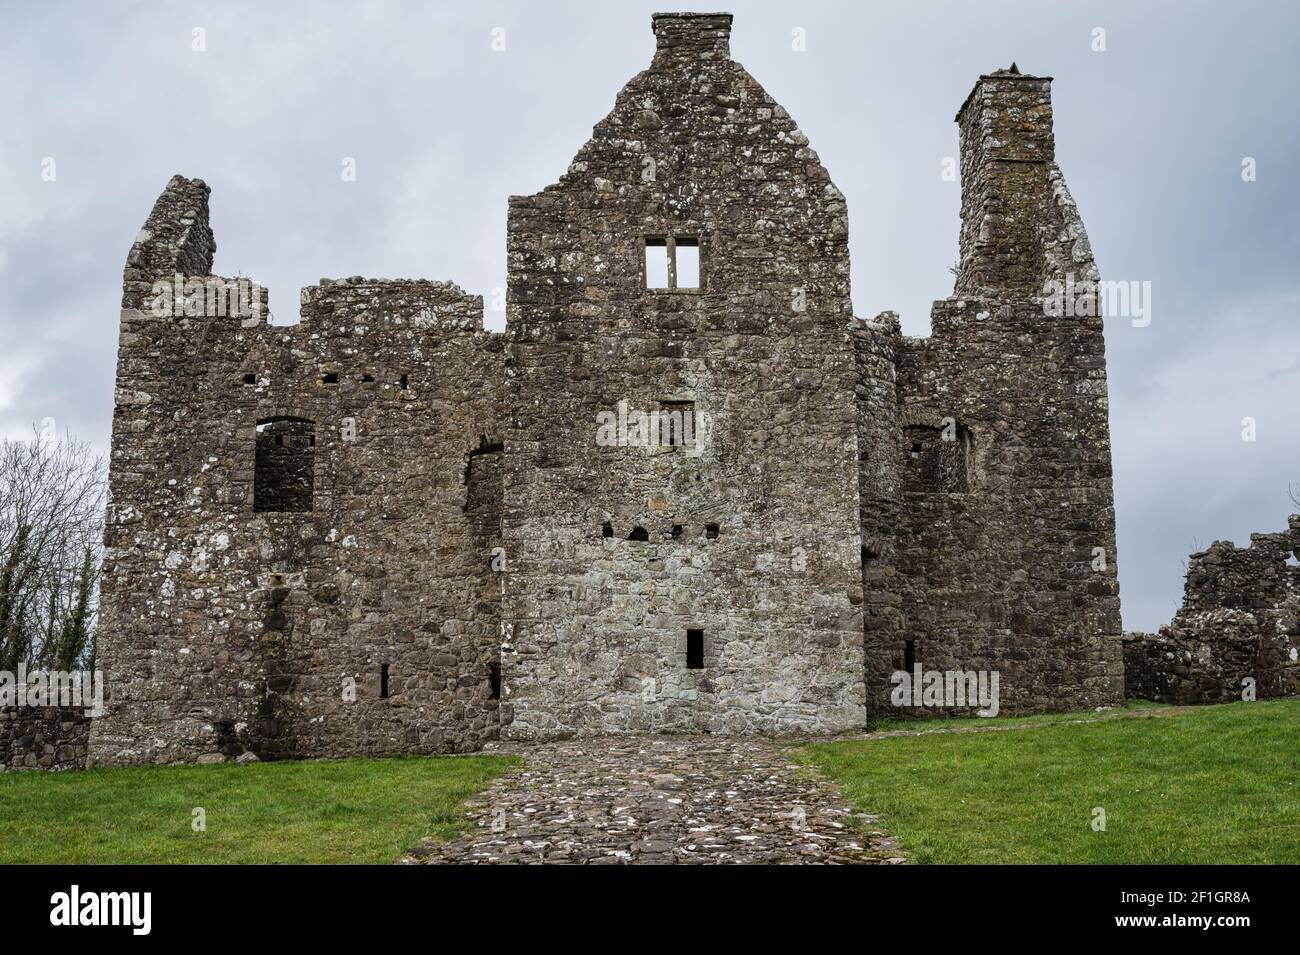 Enniskillen, Northern  Ireland - Feb 27, 2021:  The Ruins of Tully Castle on the shores of Lough Erne Stock Photo